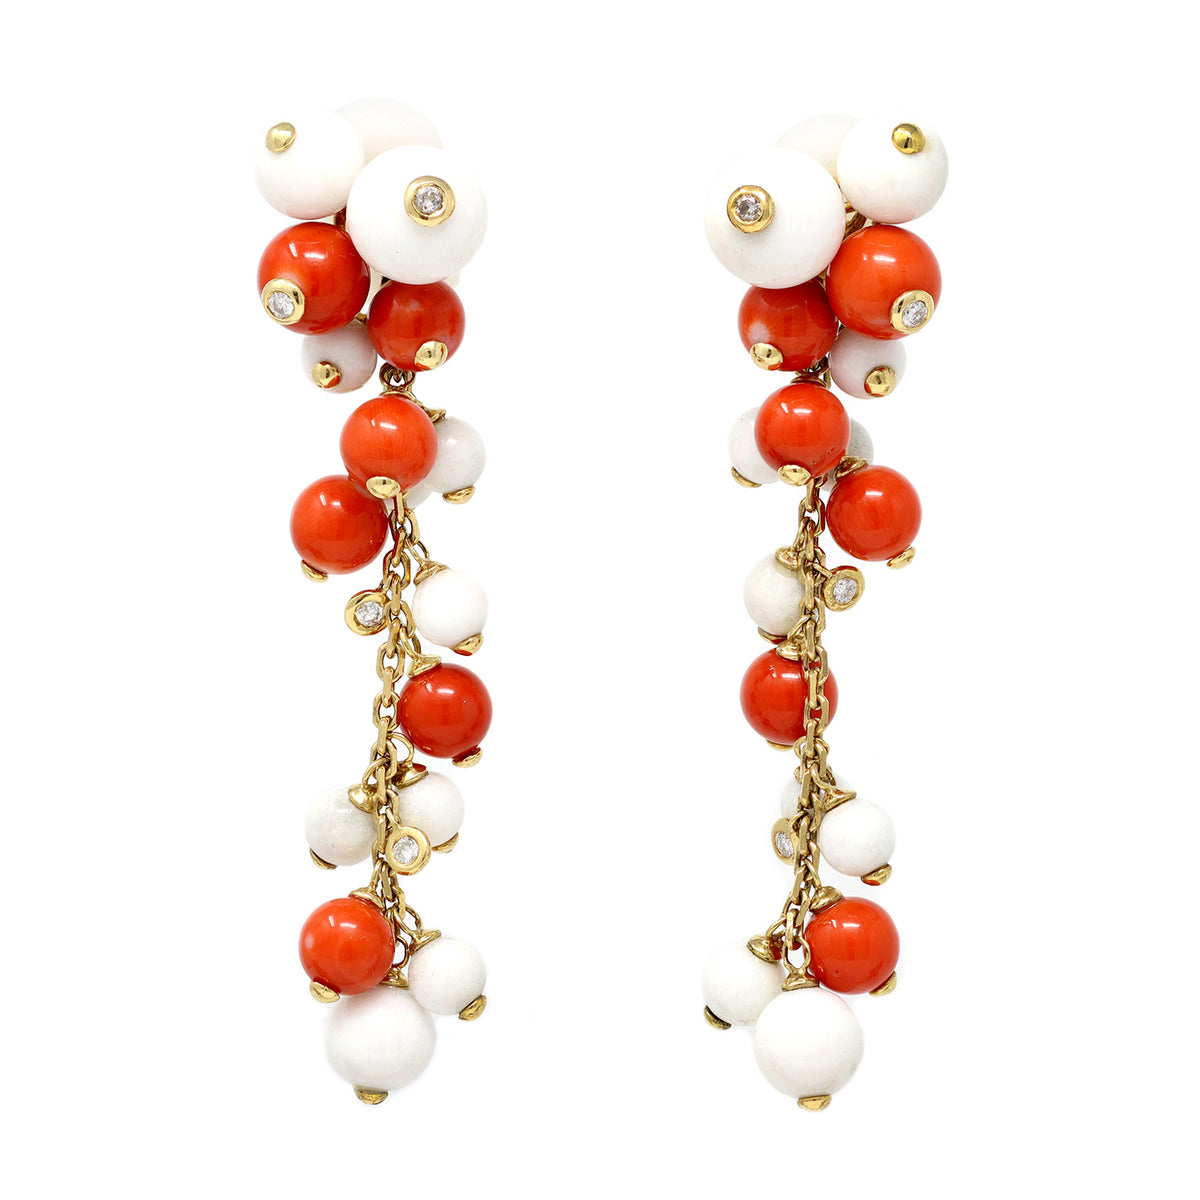 talian Coral, White Agate Beads and Diamonds Dangling Earrings in 18 Karat Gold front view